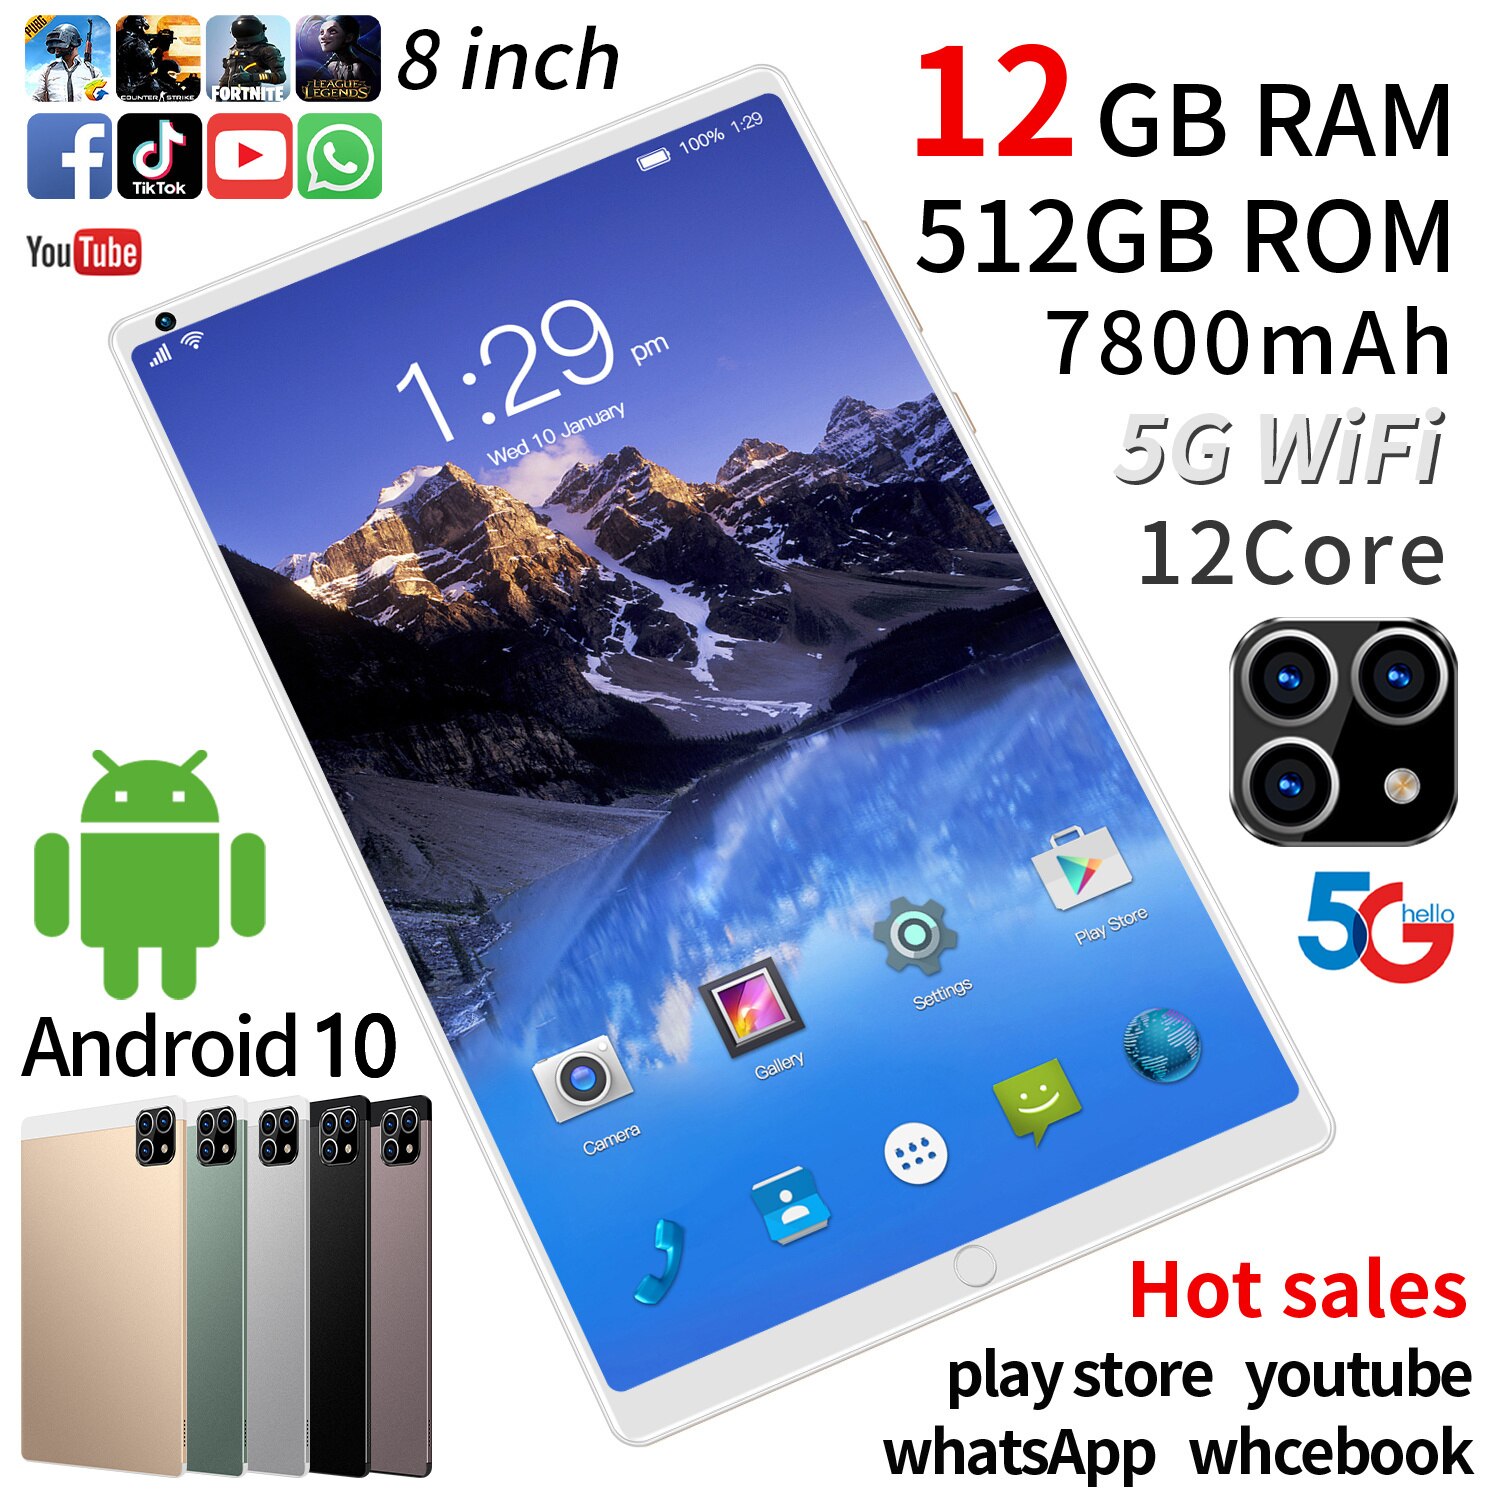 2022 New Game Tablet PC 12G+512GB 8.1 inch Screen Mobile Phone Student Learning Tablets Android 10.0 PG11 Type-c port Tablet